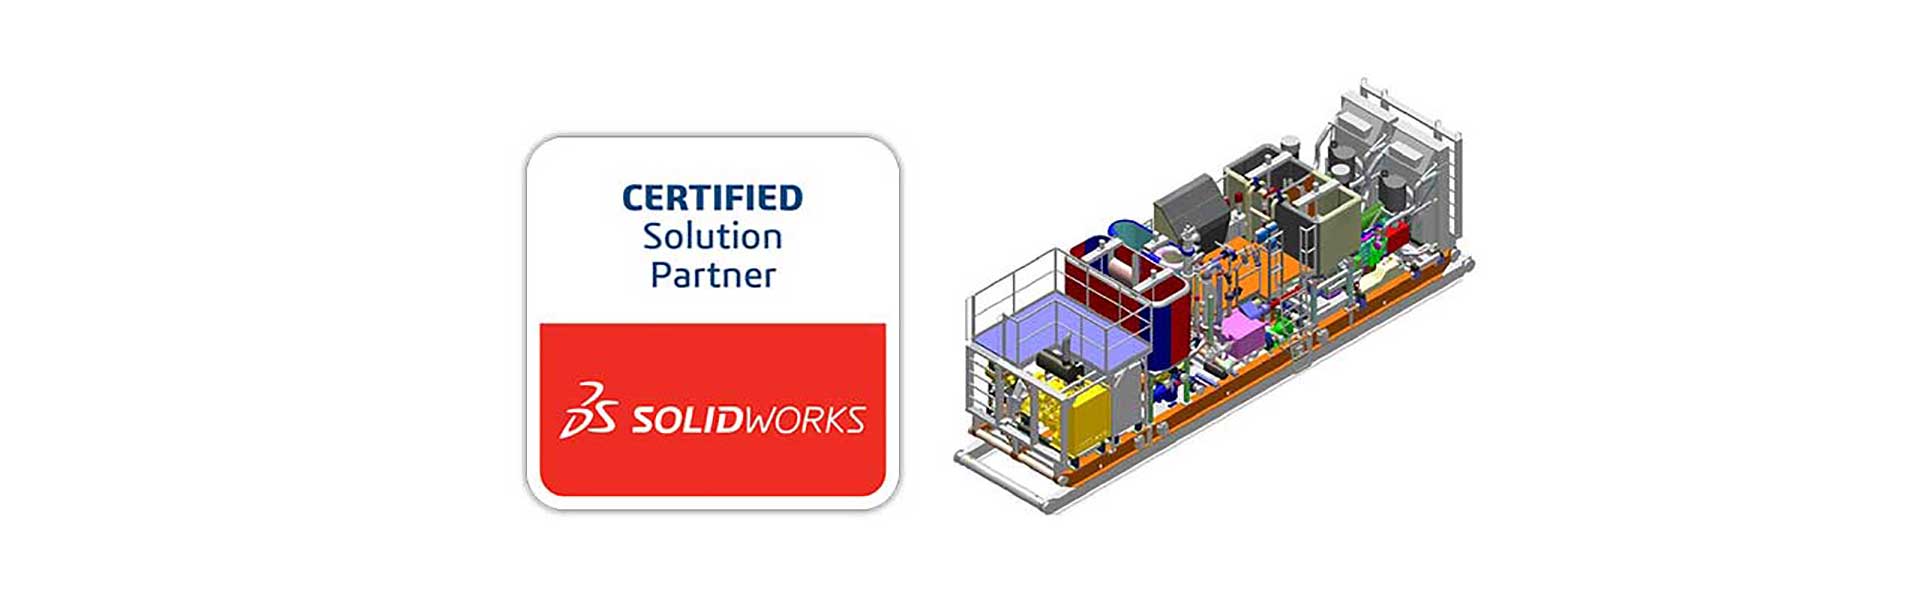 SolidWorks agreement